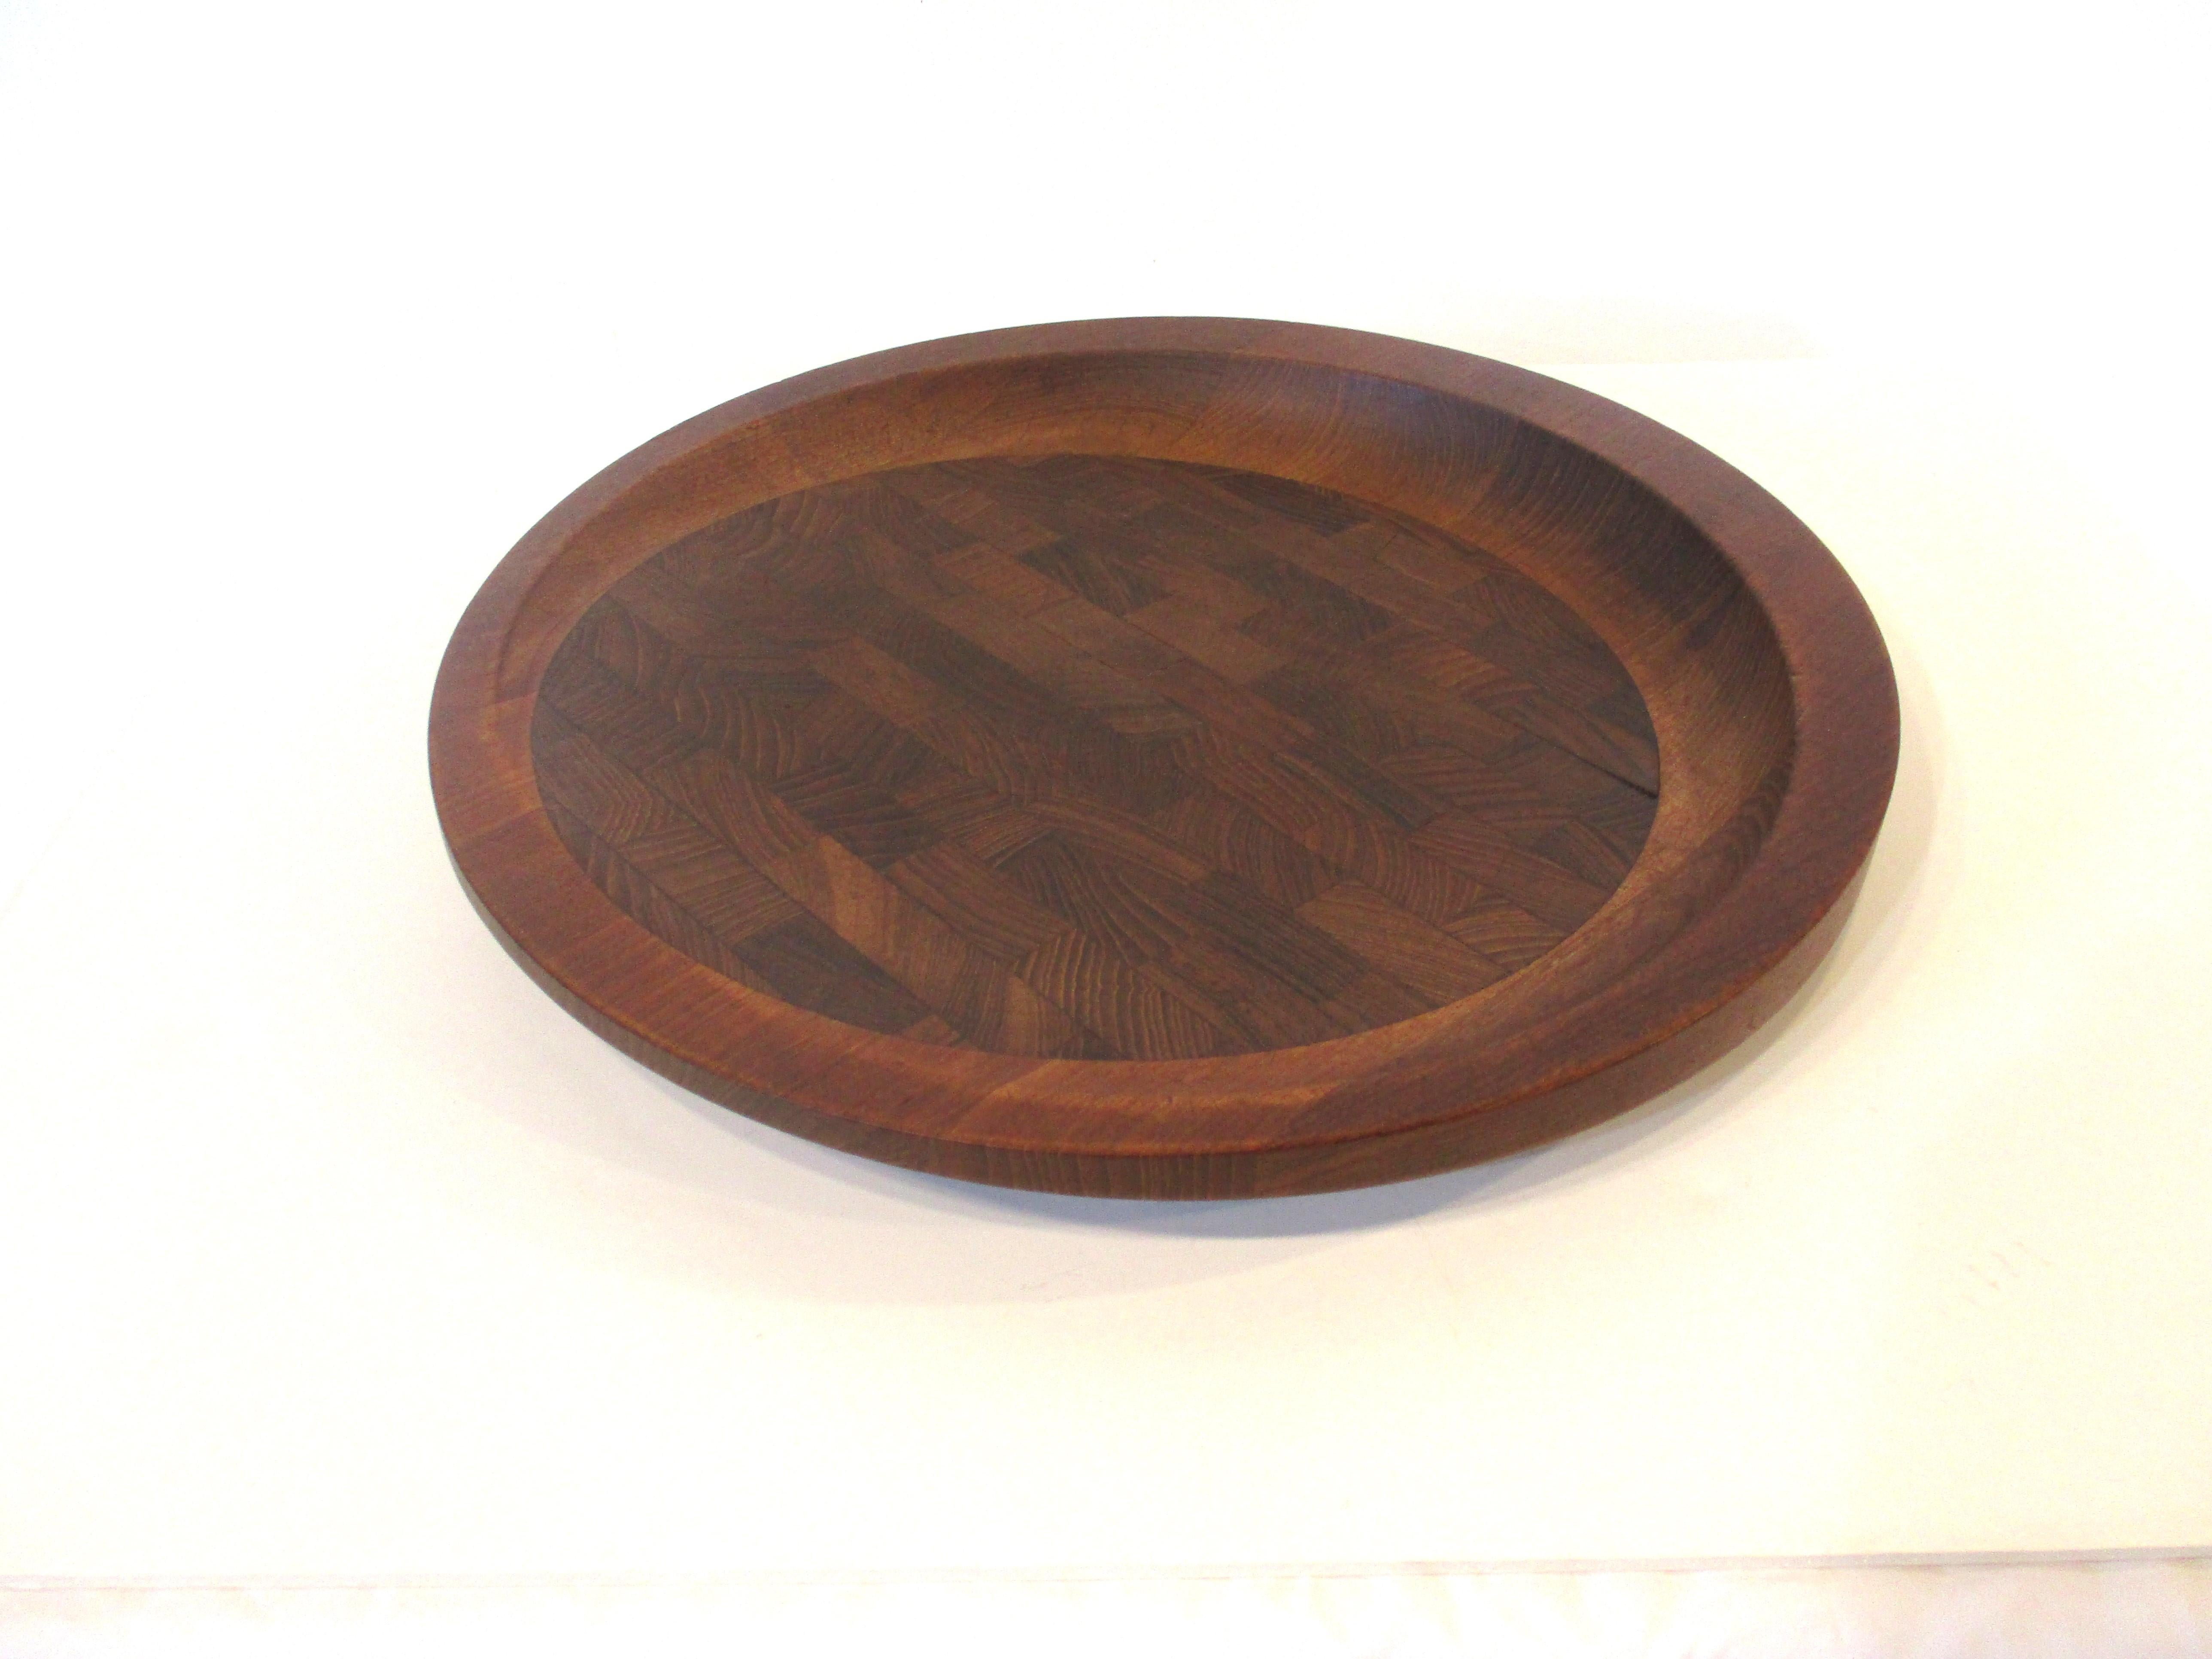 A very well crafted teakwood serving cheese / charcuterie board with lifted end and rim forming a nice design astatic . Not marked but attributed to Dansk made in Denmark.